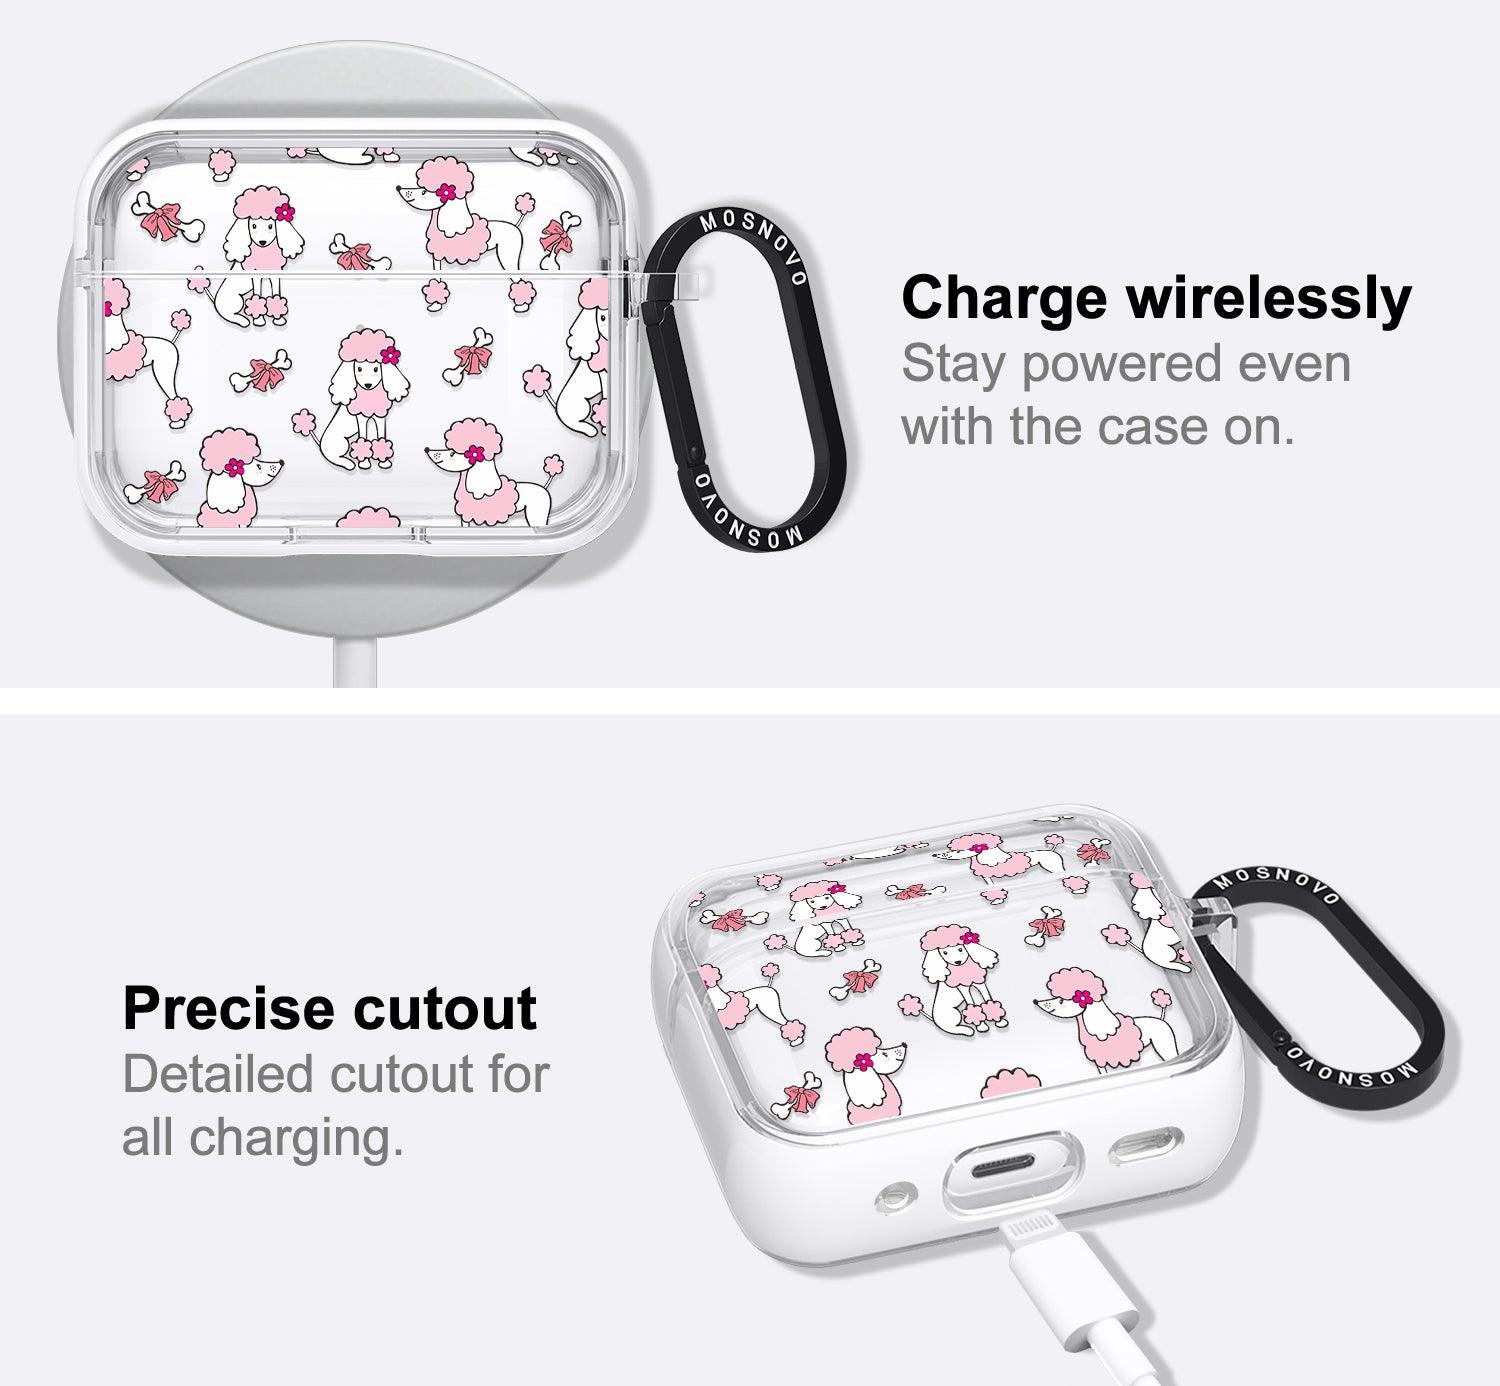 Cute Poodle AirPods Pro 2 Case (2nd Generation) - MOSNOVO